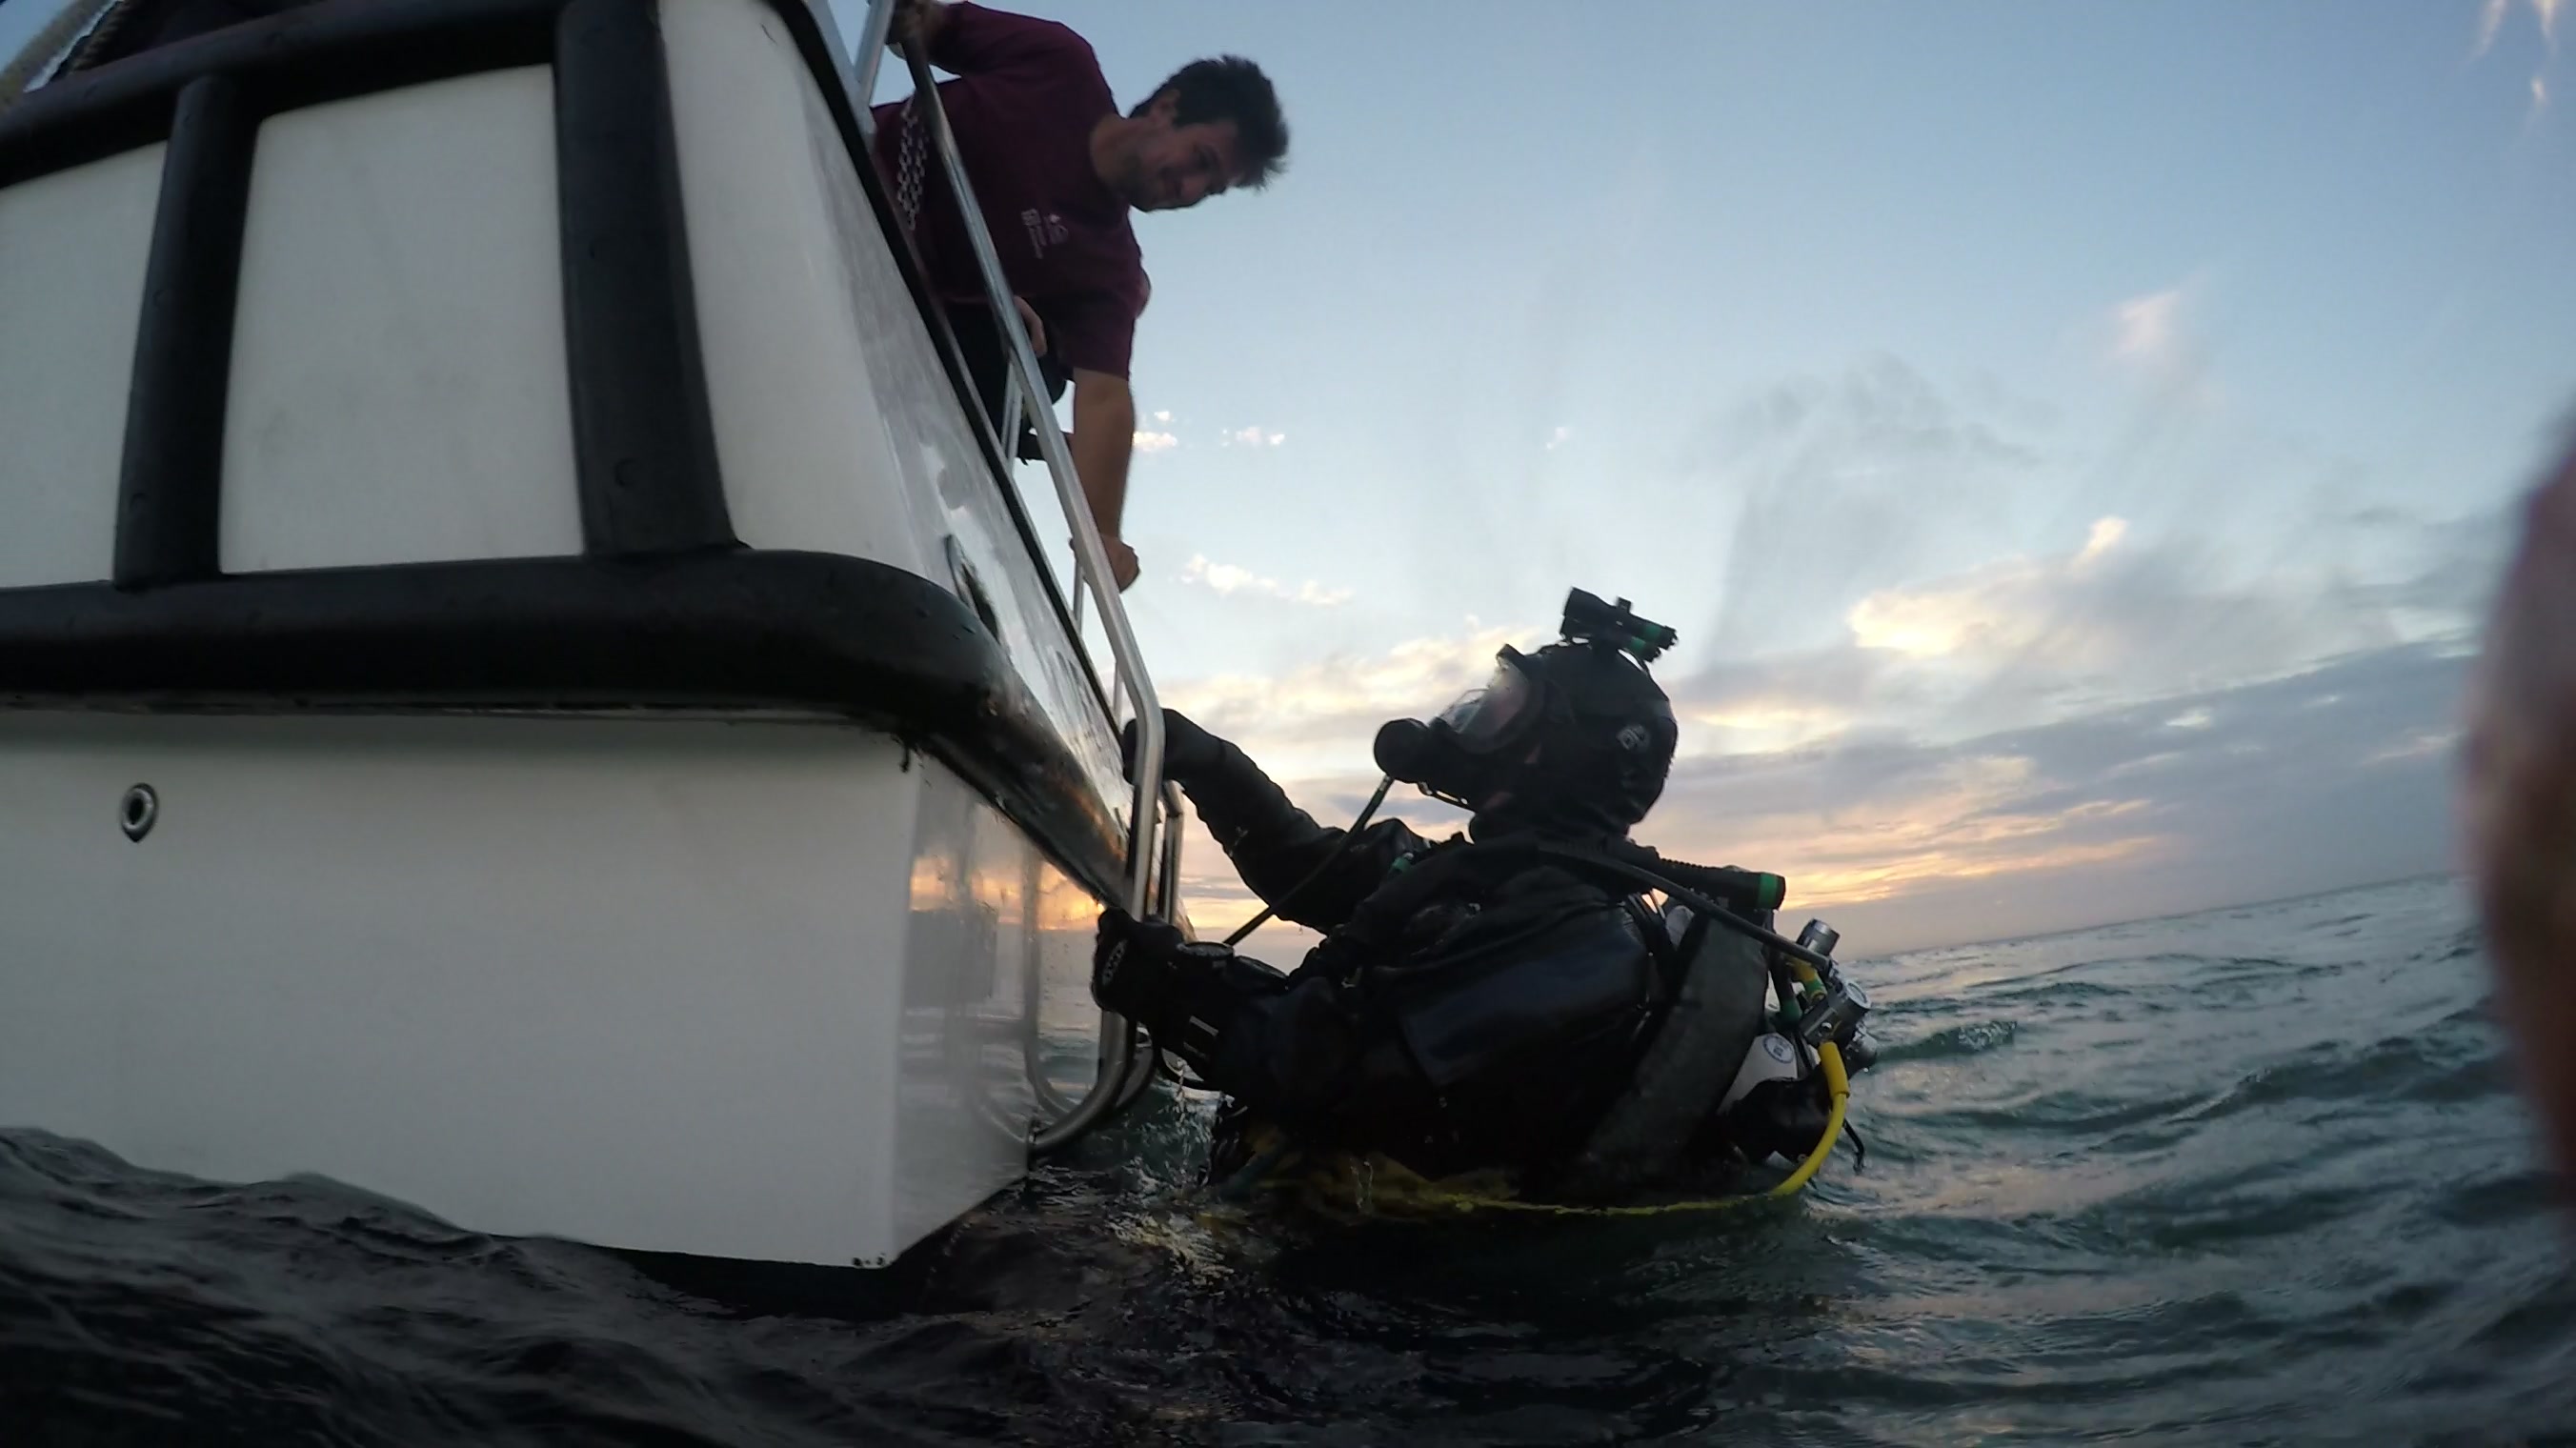 A diver wearing SCUBA equipment prepares to climb up a ladder from a boat following a dive.